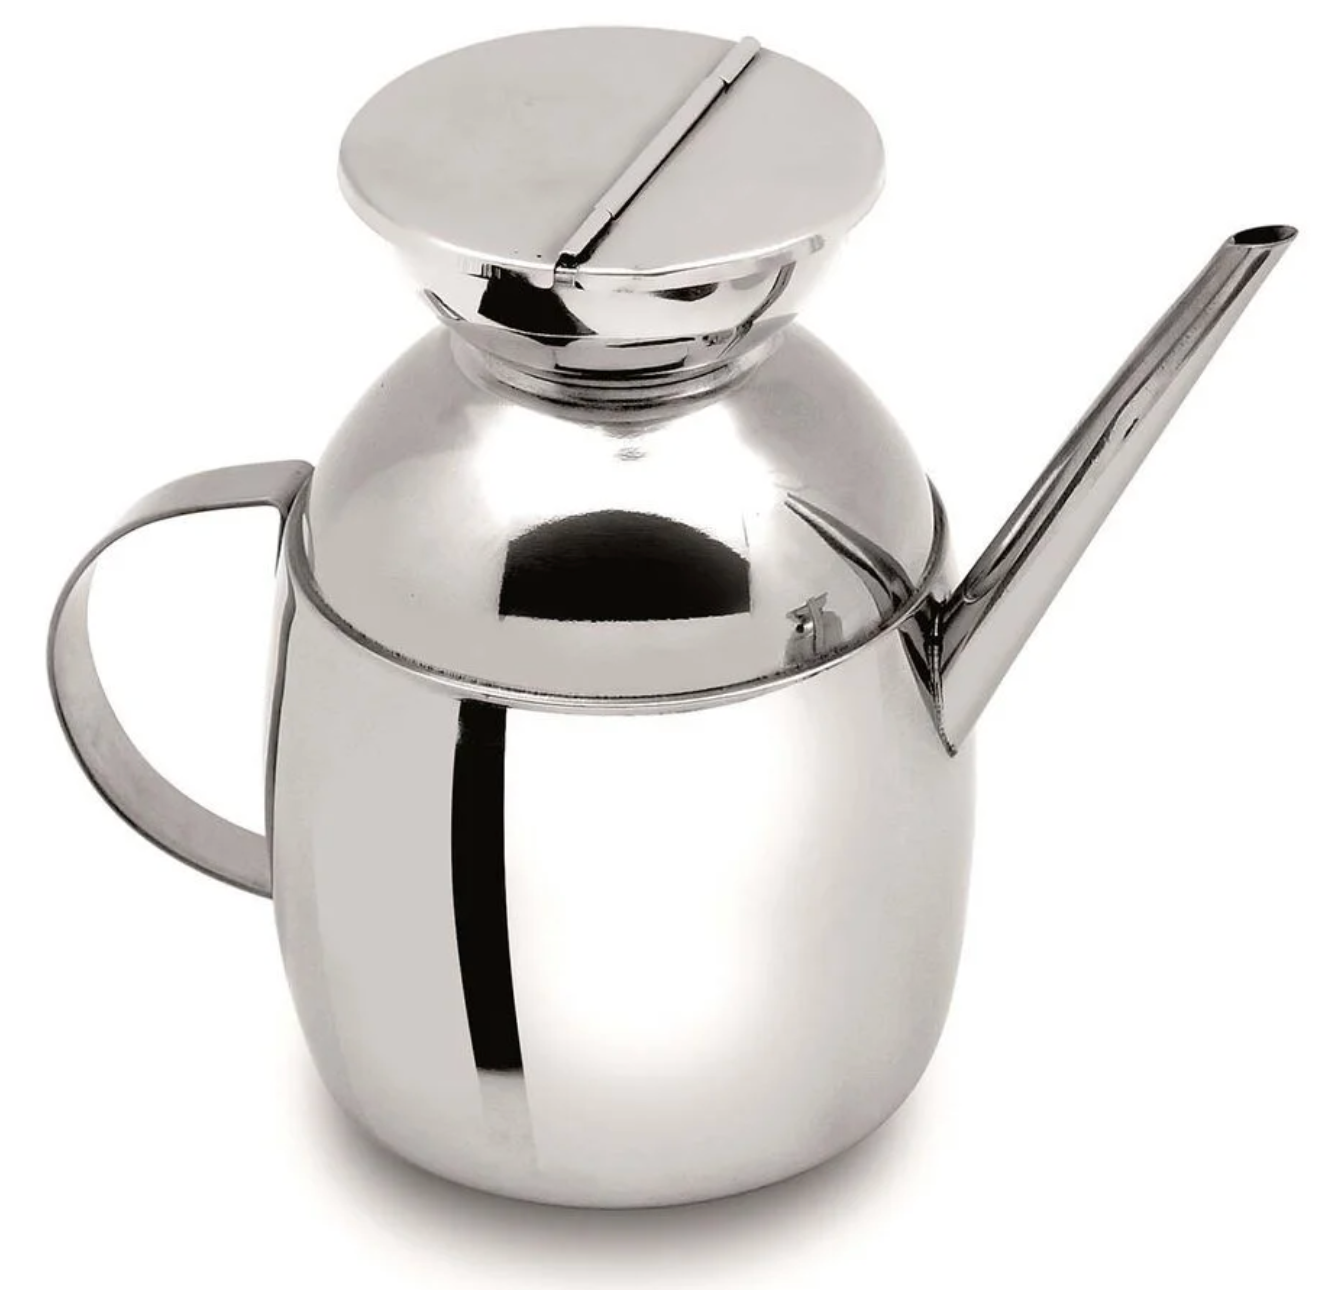 Tosca Oil Cruet - Polished Stainless Steel – 700ml